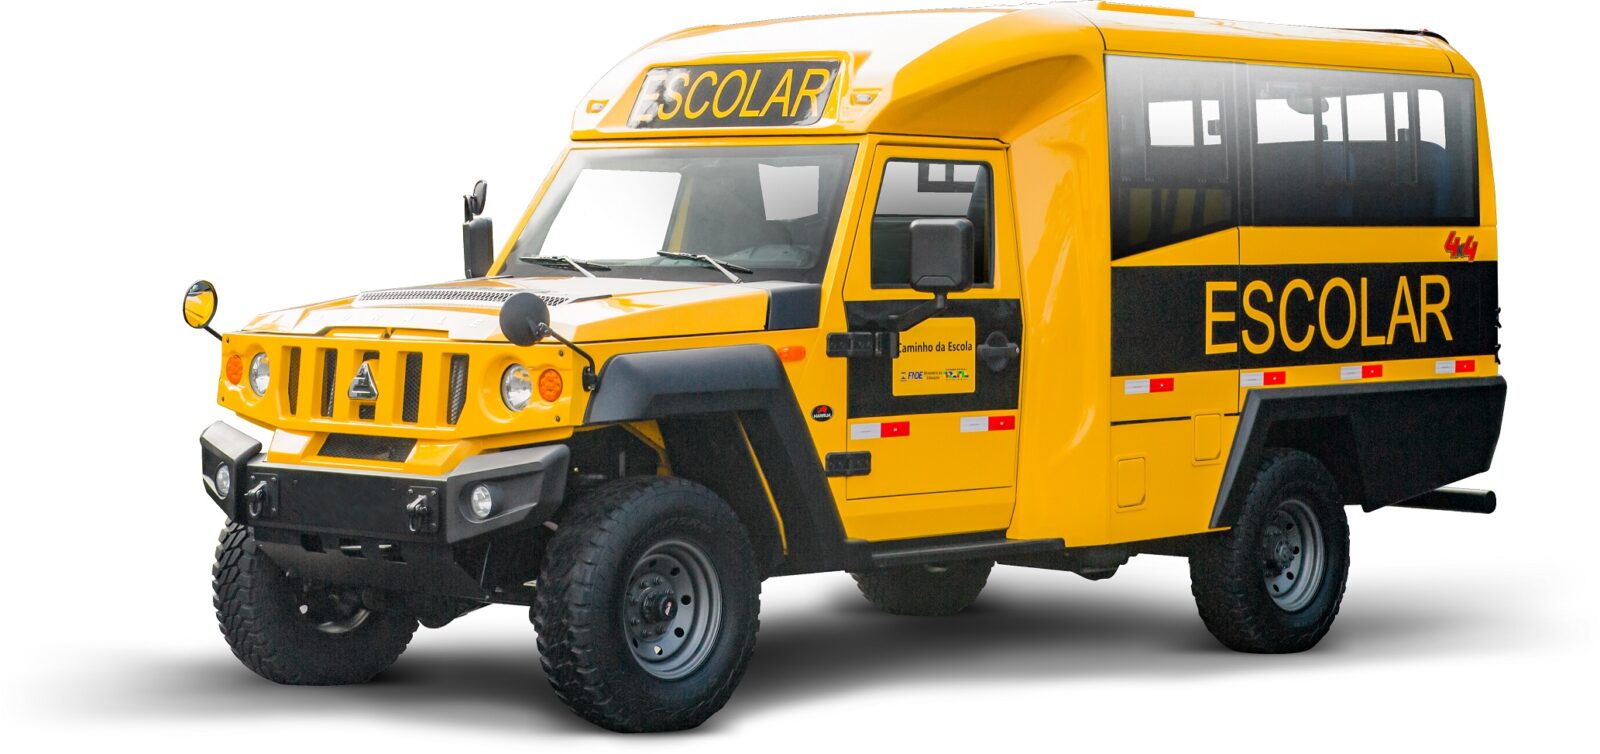 Agrale to supply 400 minibuses tothe School Path Program